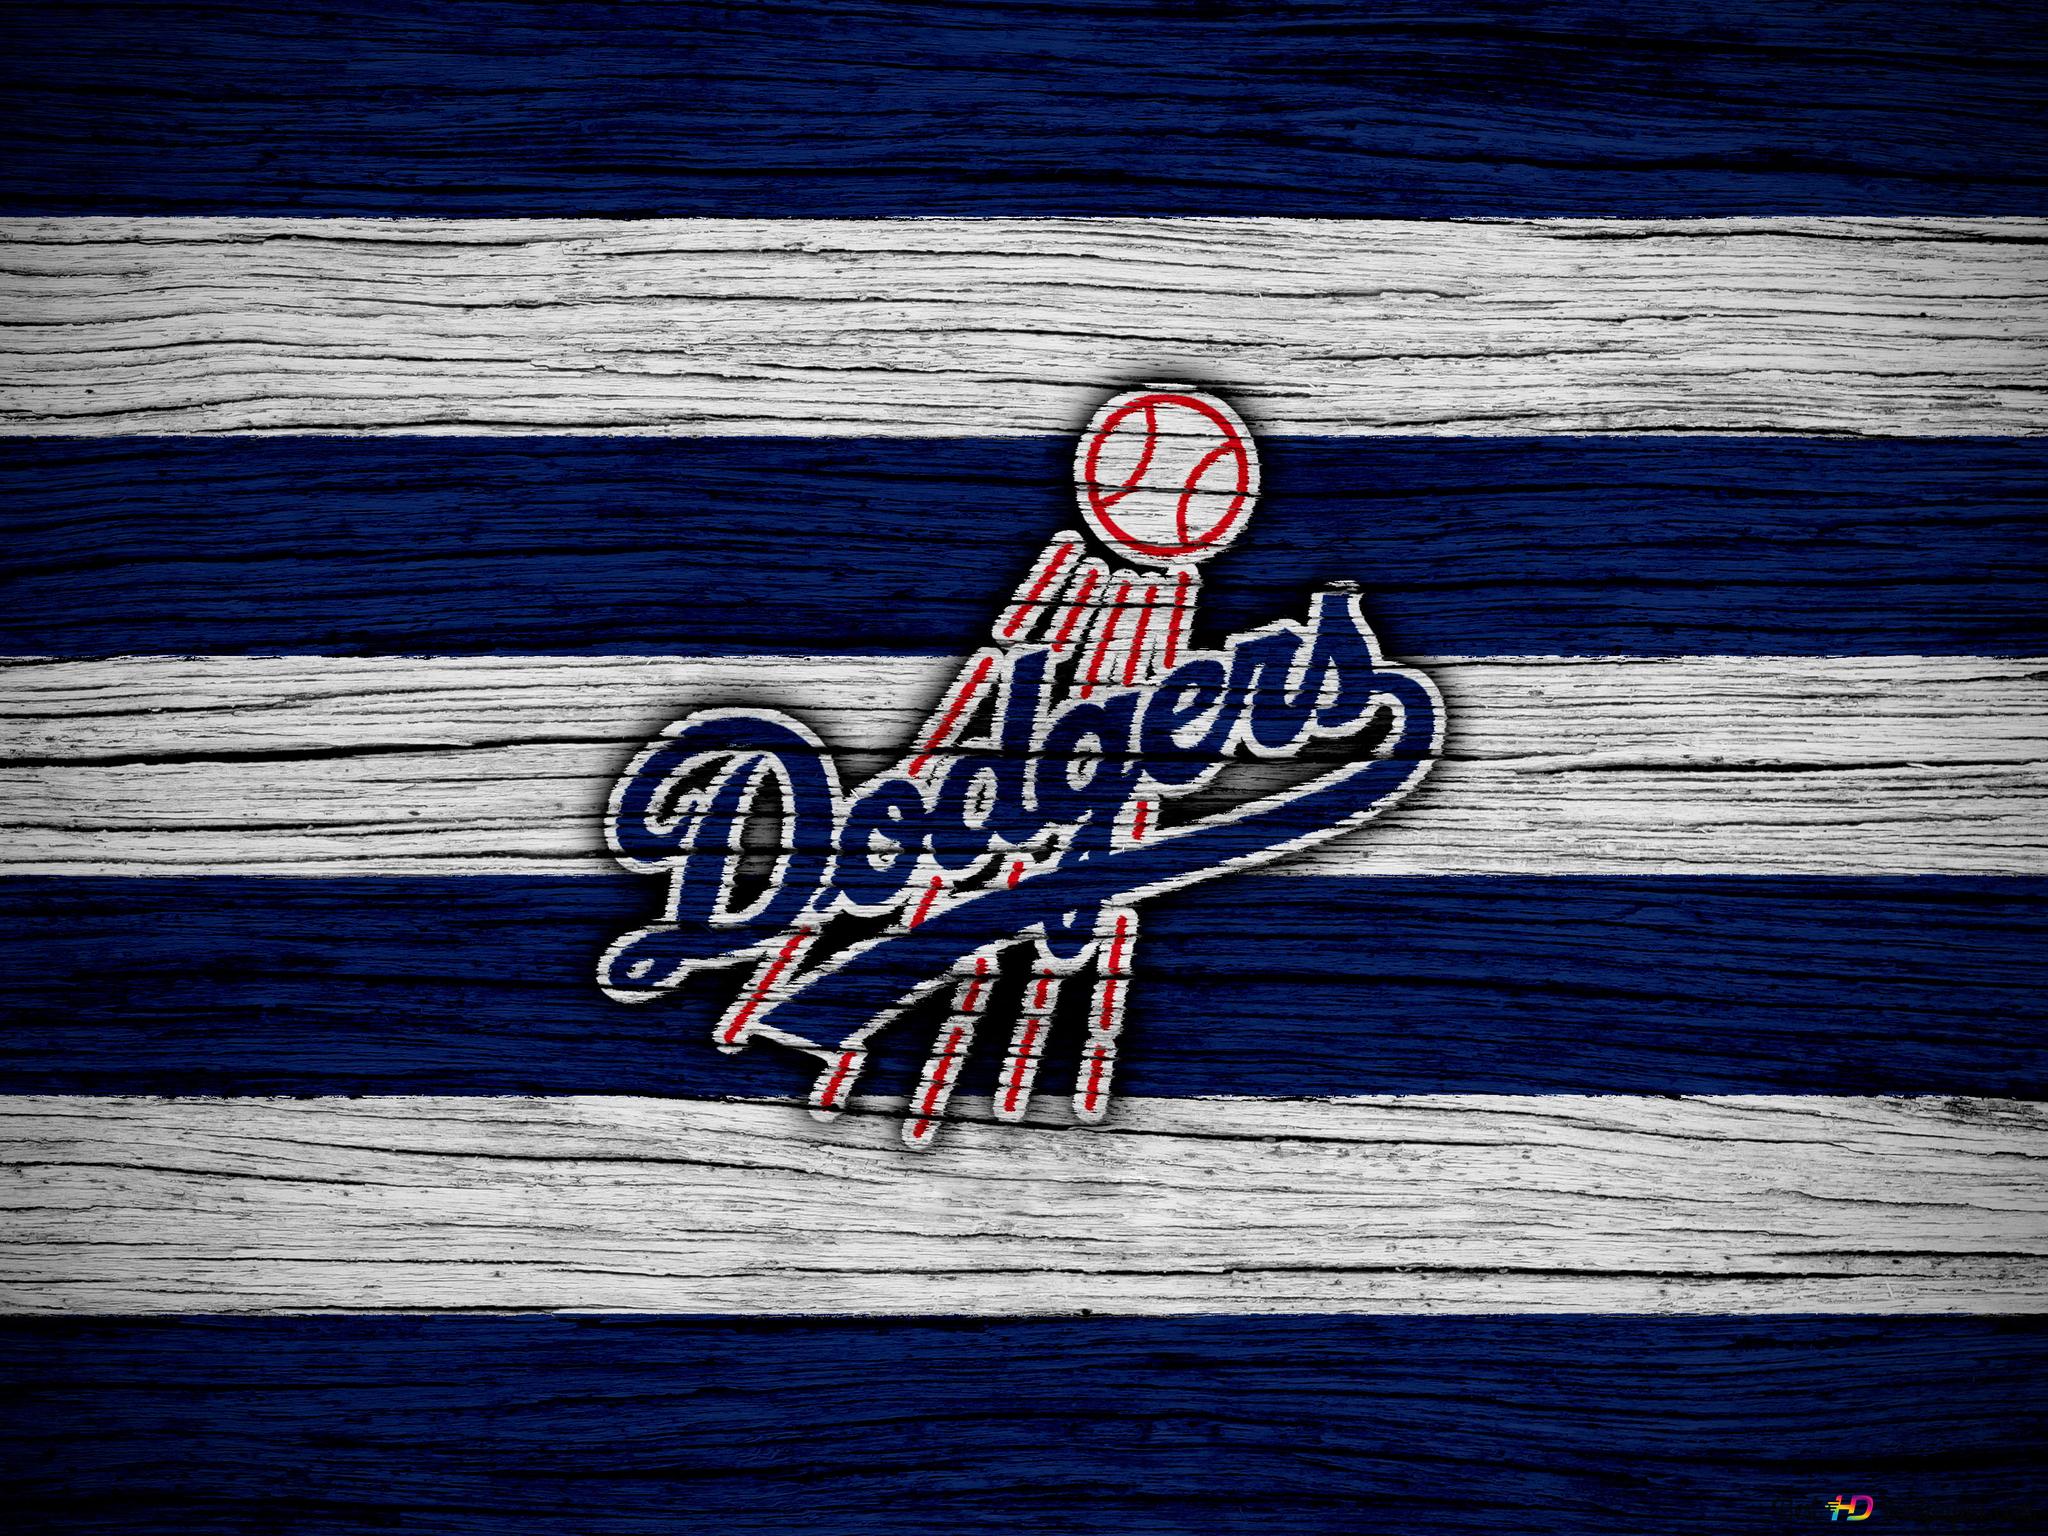 Dodgers team logo over the grunge wooden background that painted with their logo colors 4K wallpaper download